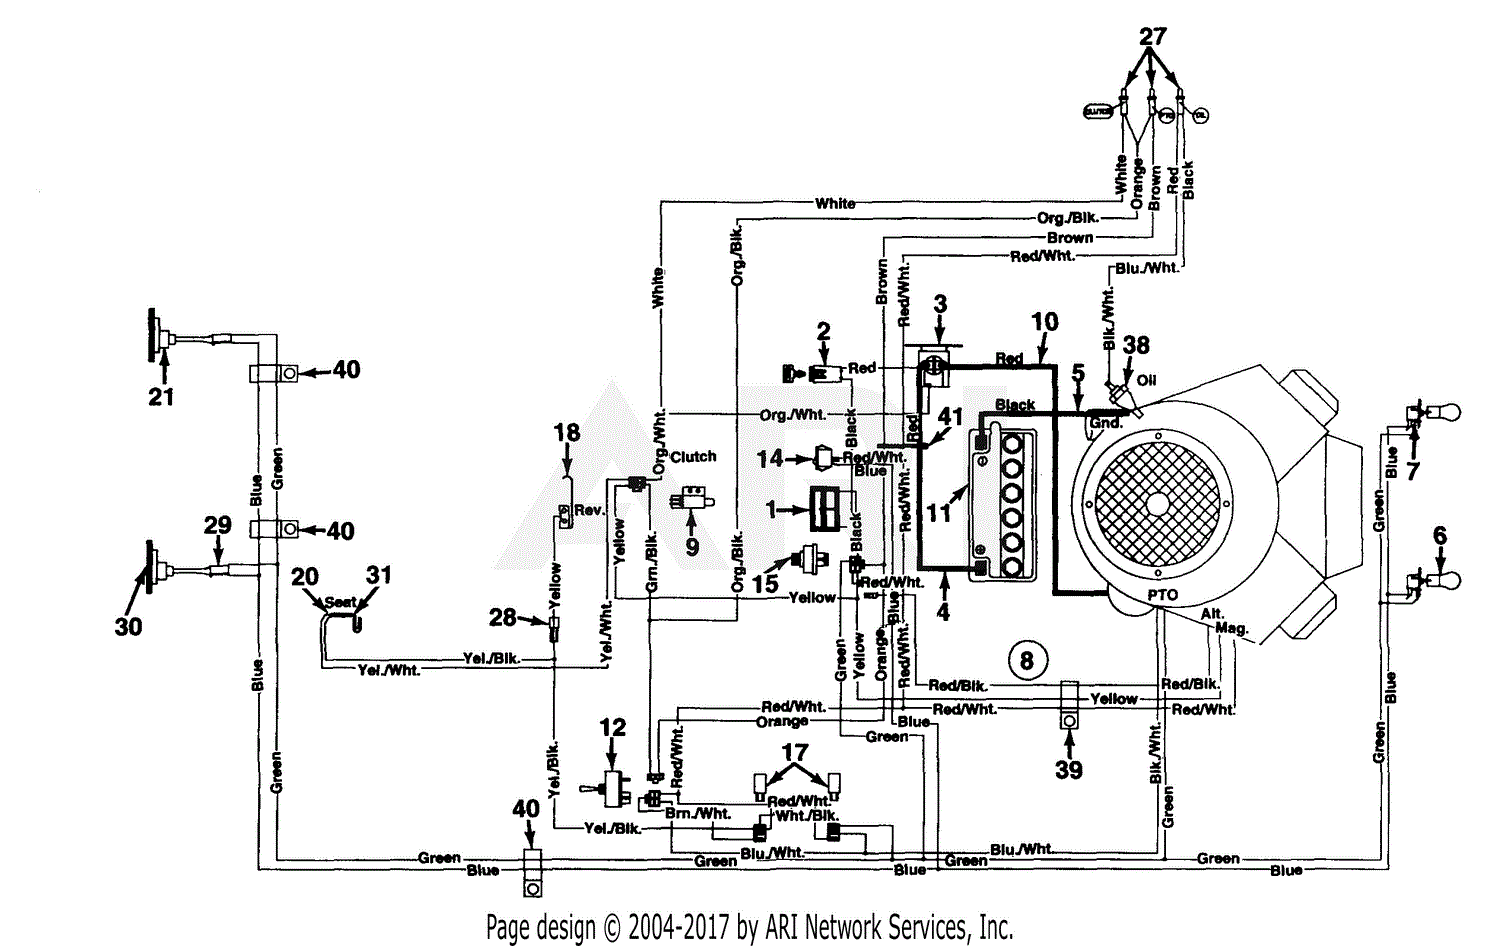 Diagram Bolens Lawn Tractor Ignition Switch Wiring Diagram Full Version Hd Quality Wiring Diagram Ebookinformationdirectory Just A Spark Fr